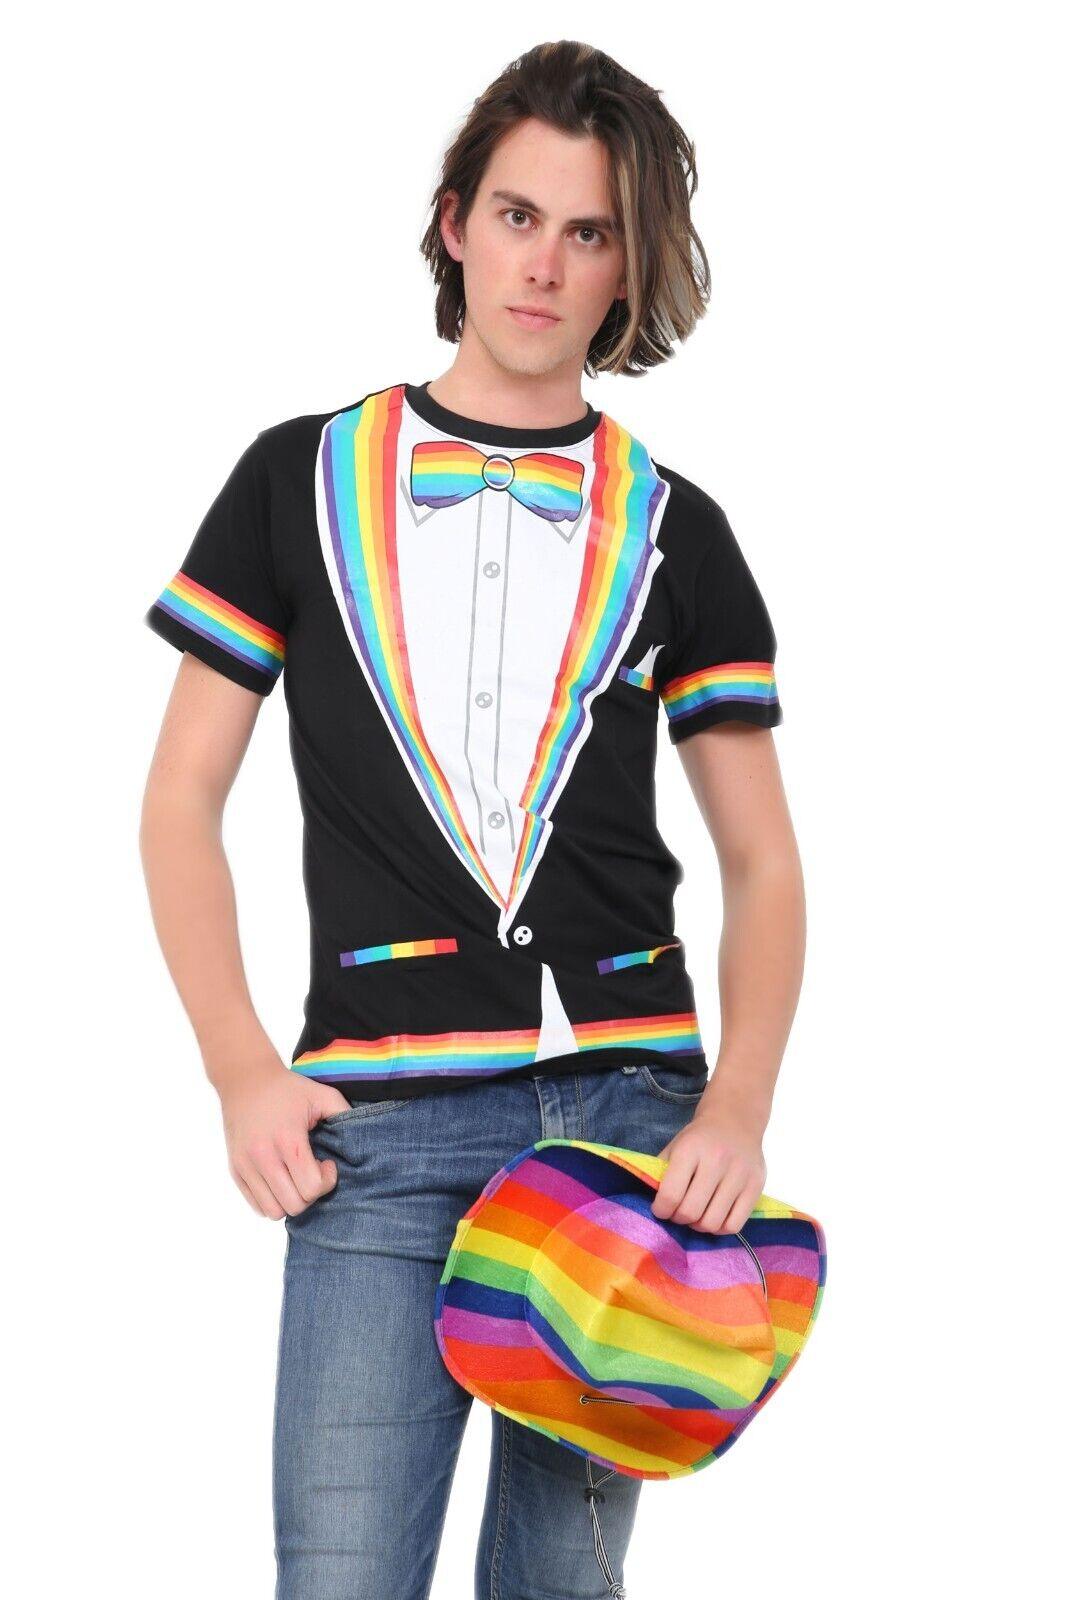 Adults Rainbow Printed T-Shirt with Cowboy Hat LGBTQ Gay Pride Unisex Fancy Dress Party Costume - Labreeze